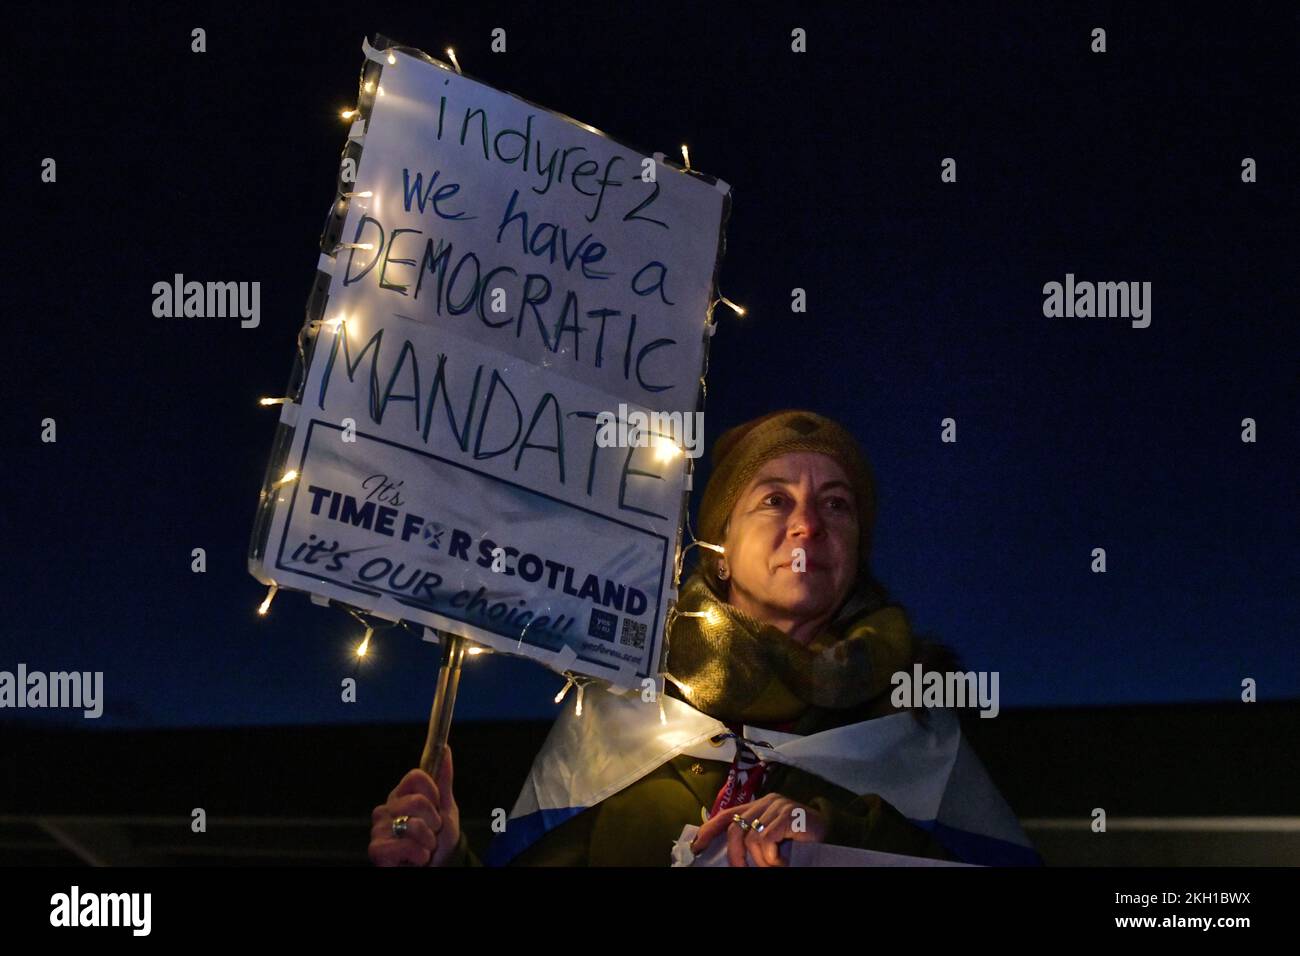 Edinburgh Scotland, UK 23 November 2022. Scottish independence supporters gather outside the Scottish Parliament following the Supreme Court ruling on the Scottish Independence Referendum. credit sst/alamy live news Stock Photo